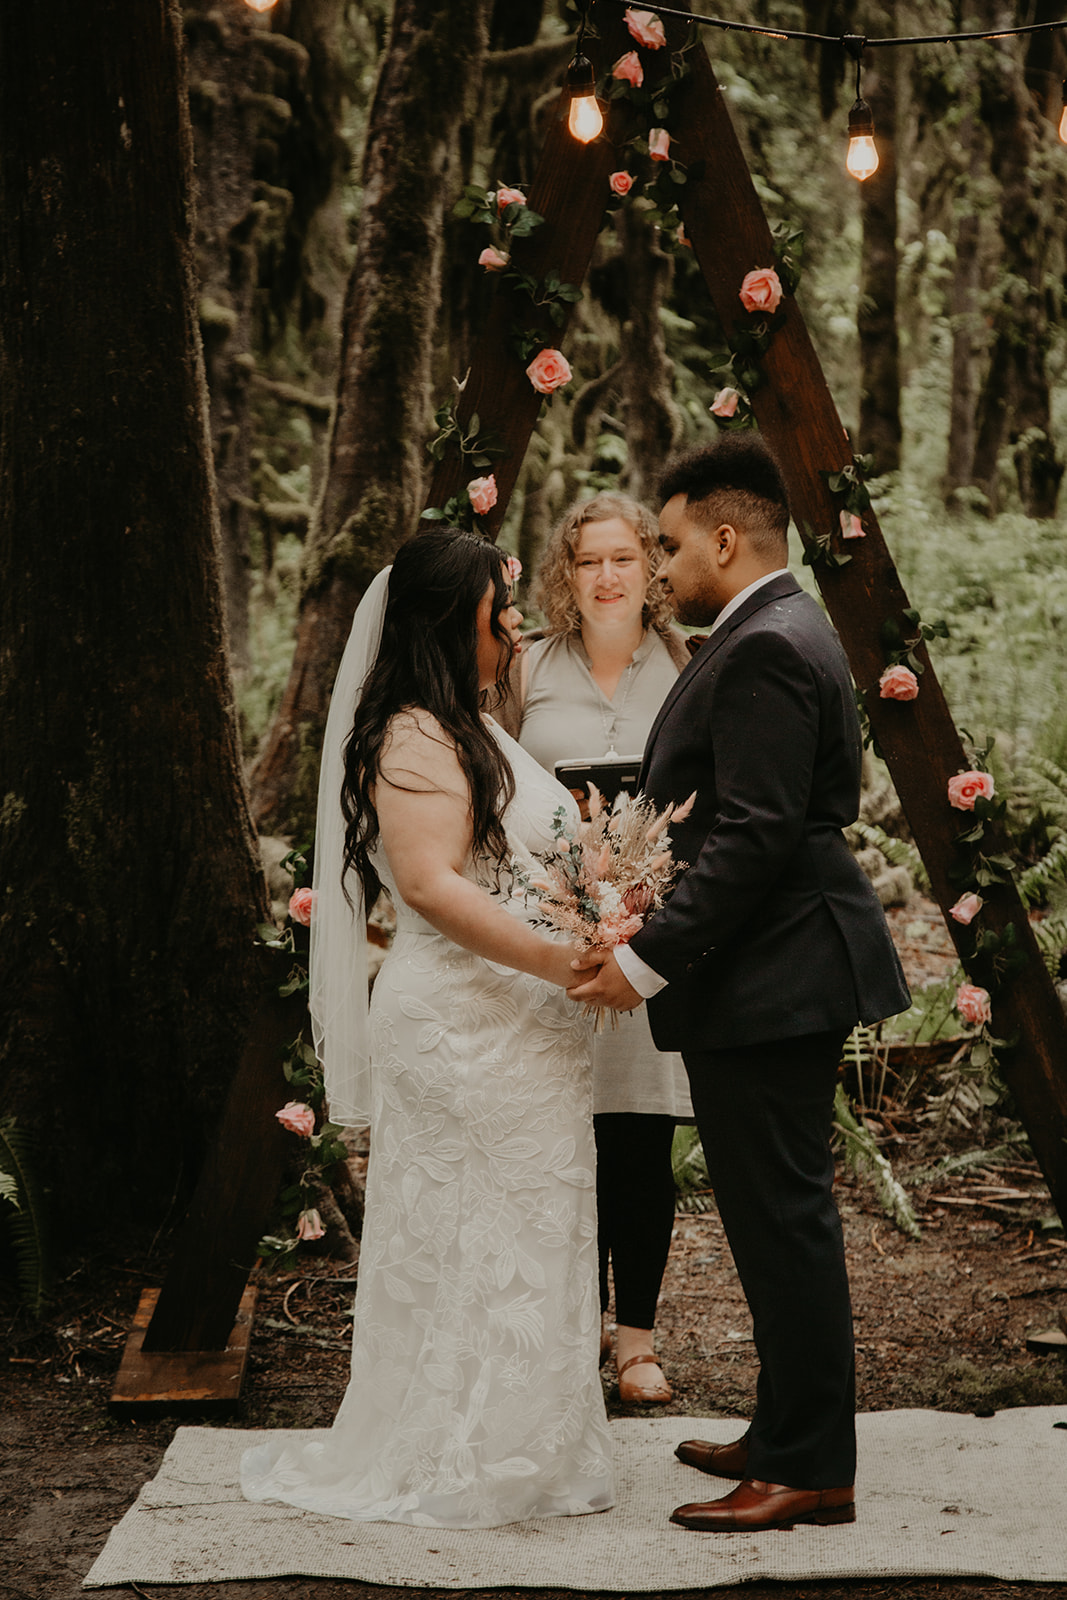 Yasmeen and Adam wedding at Sitka Farms with Young Hip & Married wedding officiant Shalom